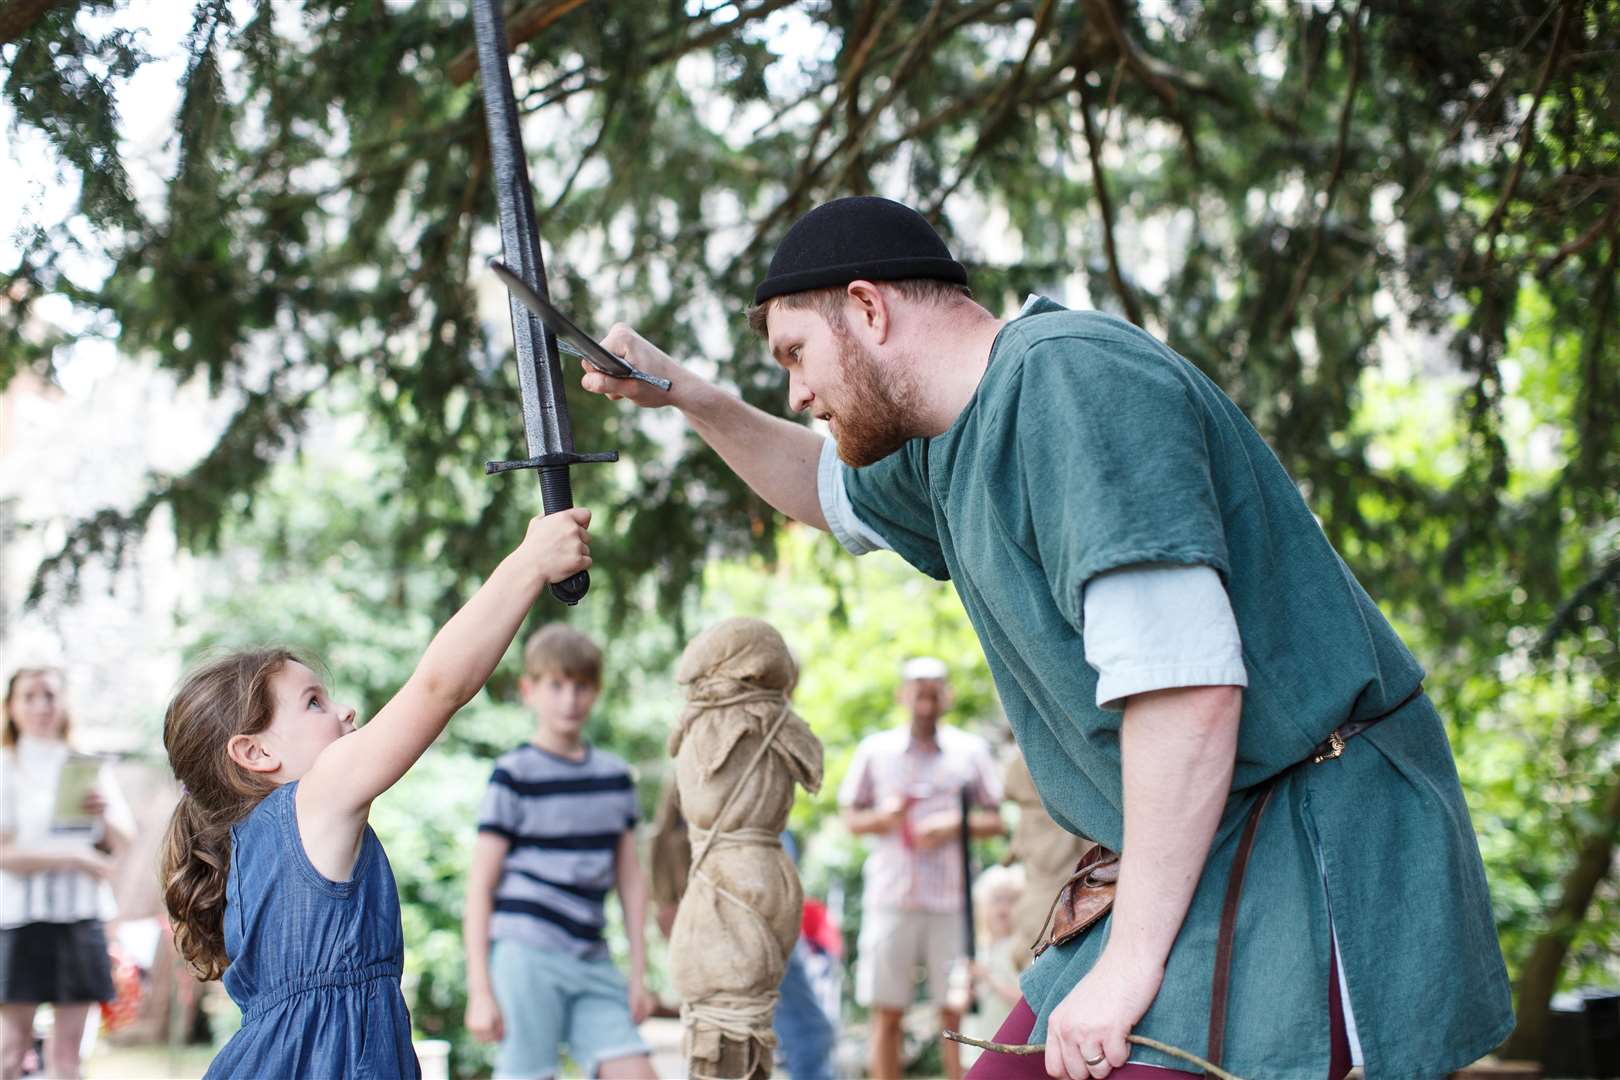 Combat training as part of medieval activities